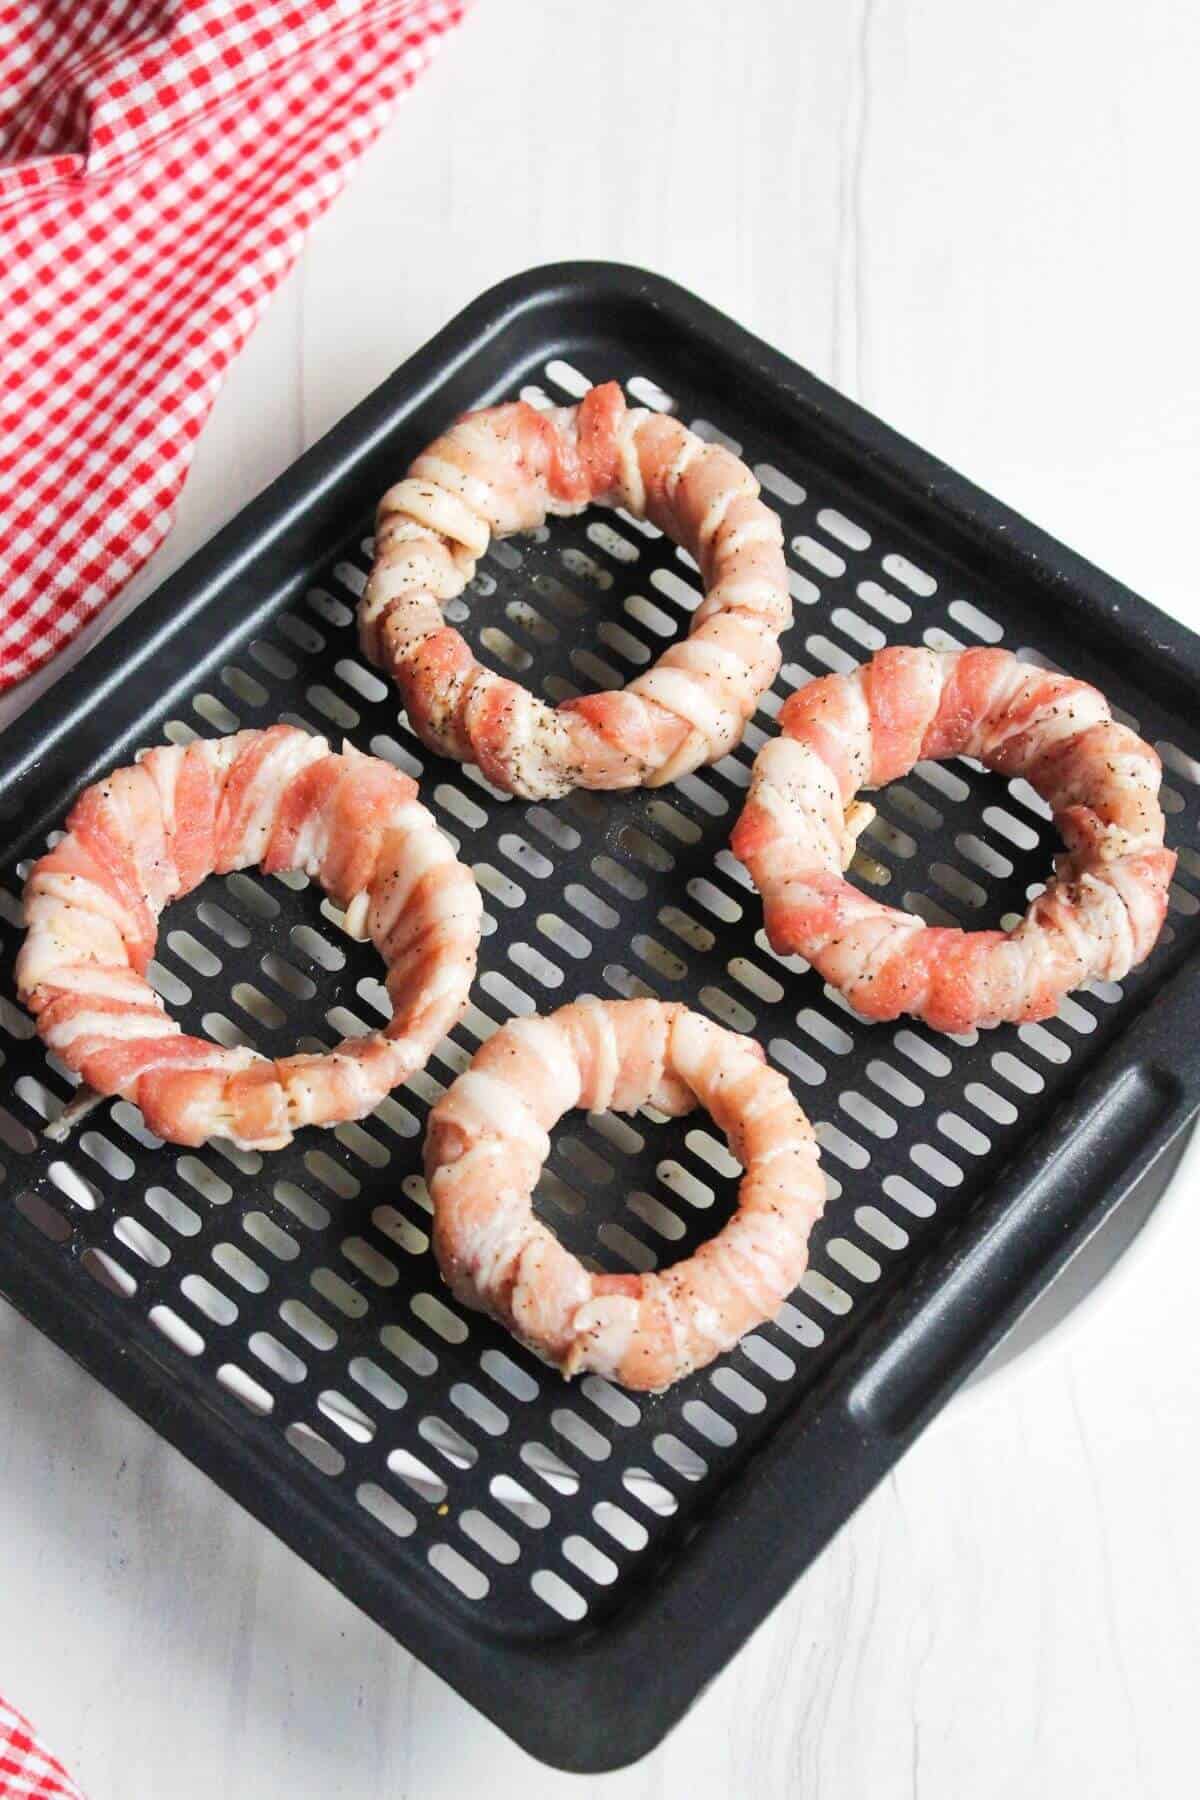 Bacon wrapped onion rings on air fryer tray.